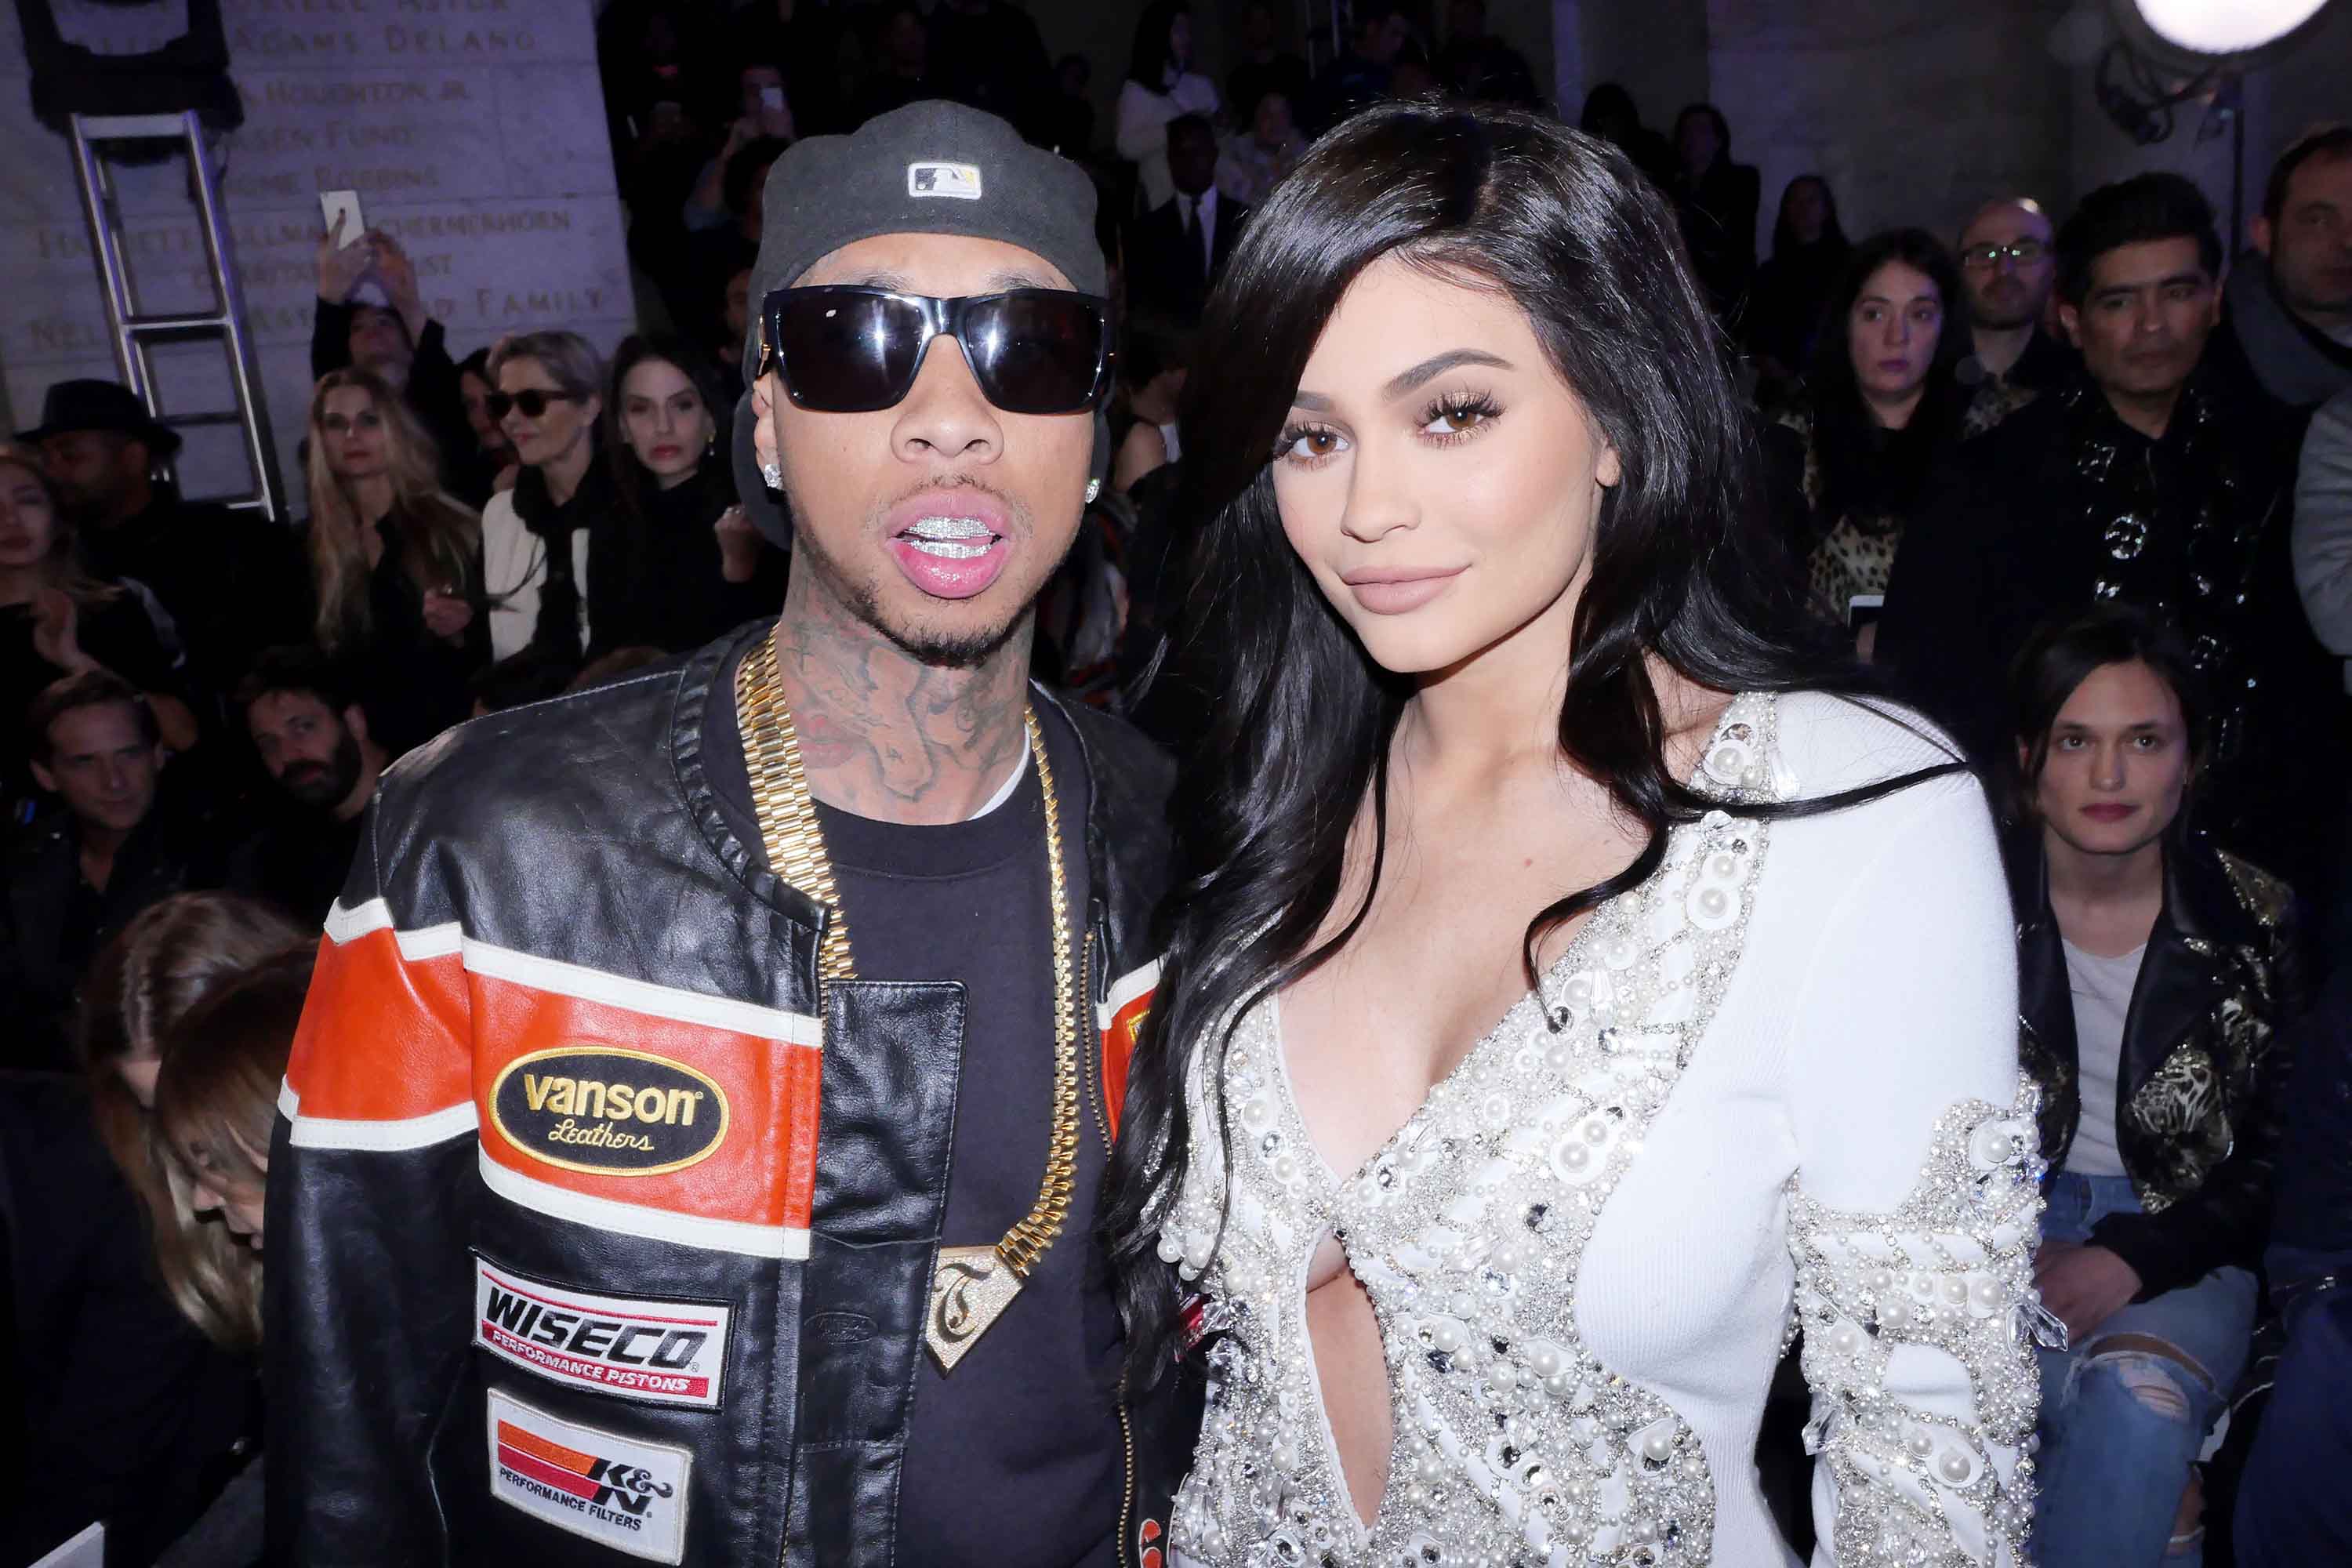 No, Tyga is not Kylie Jenner's baby daddy | CNN